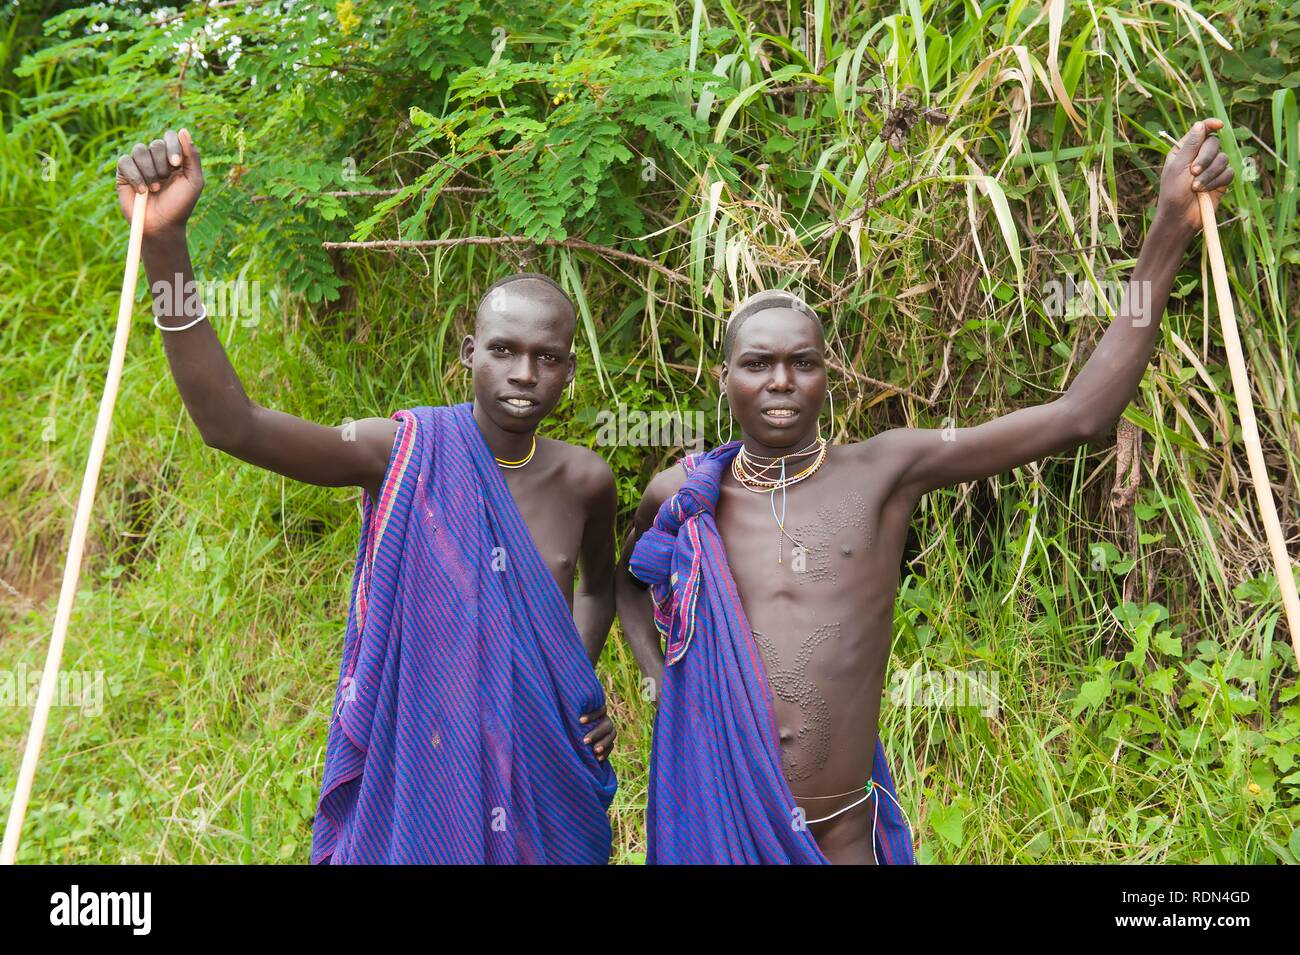 Two Surma men with scarifications, Tlgit, Omo River Valley, Ethiopia, Africa Stock Photo